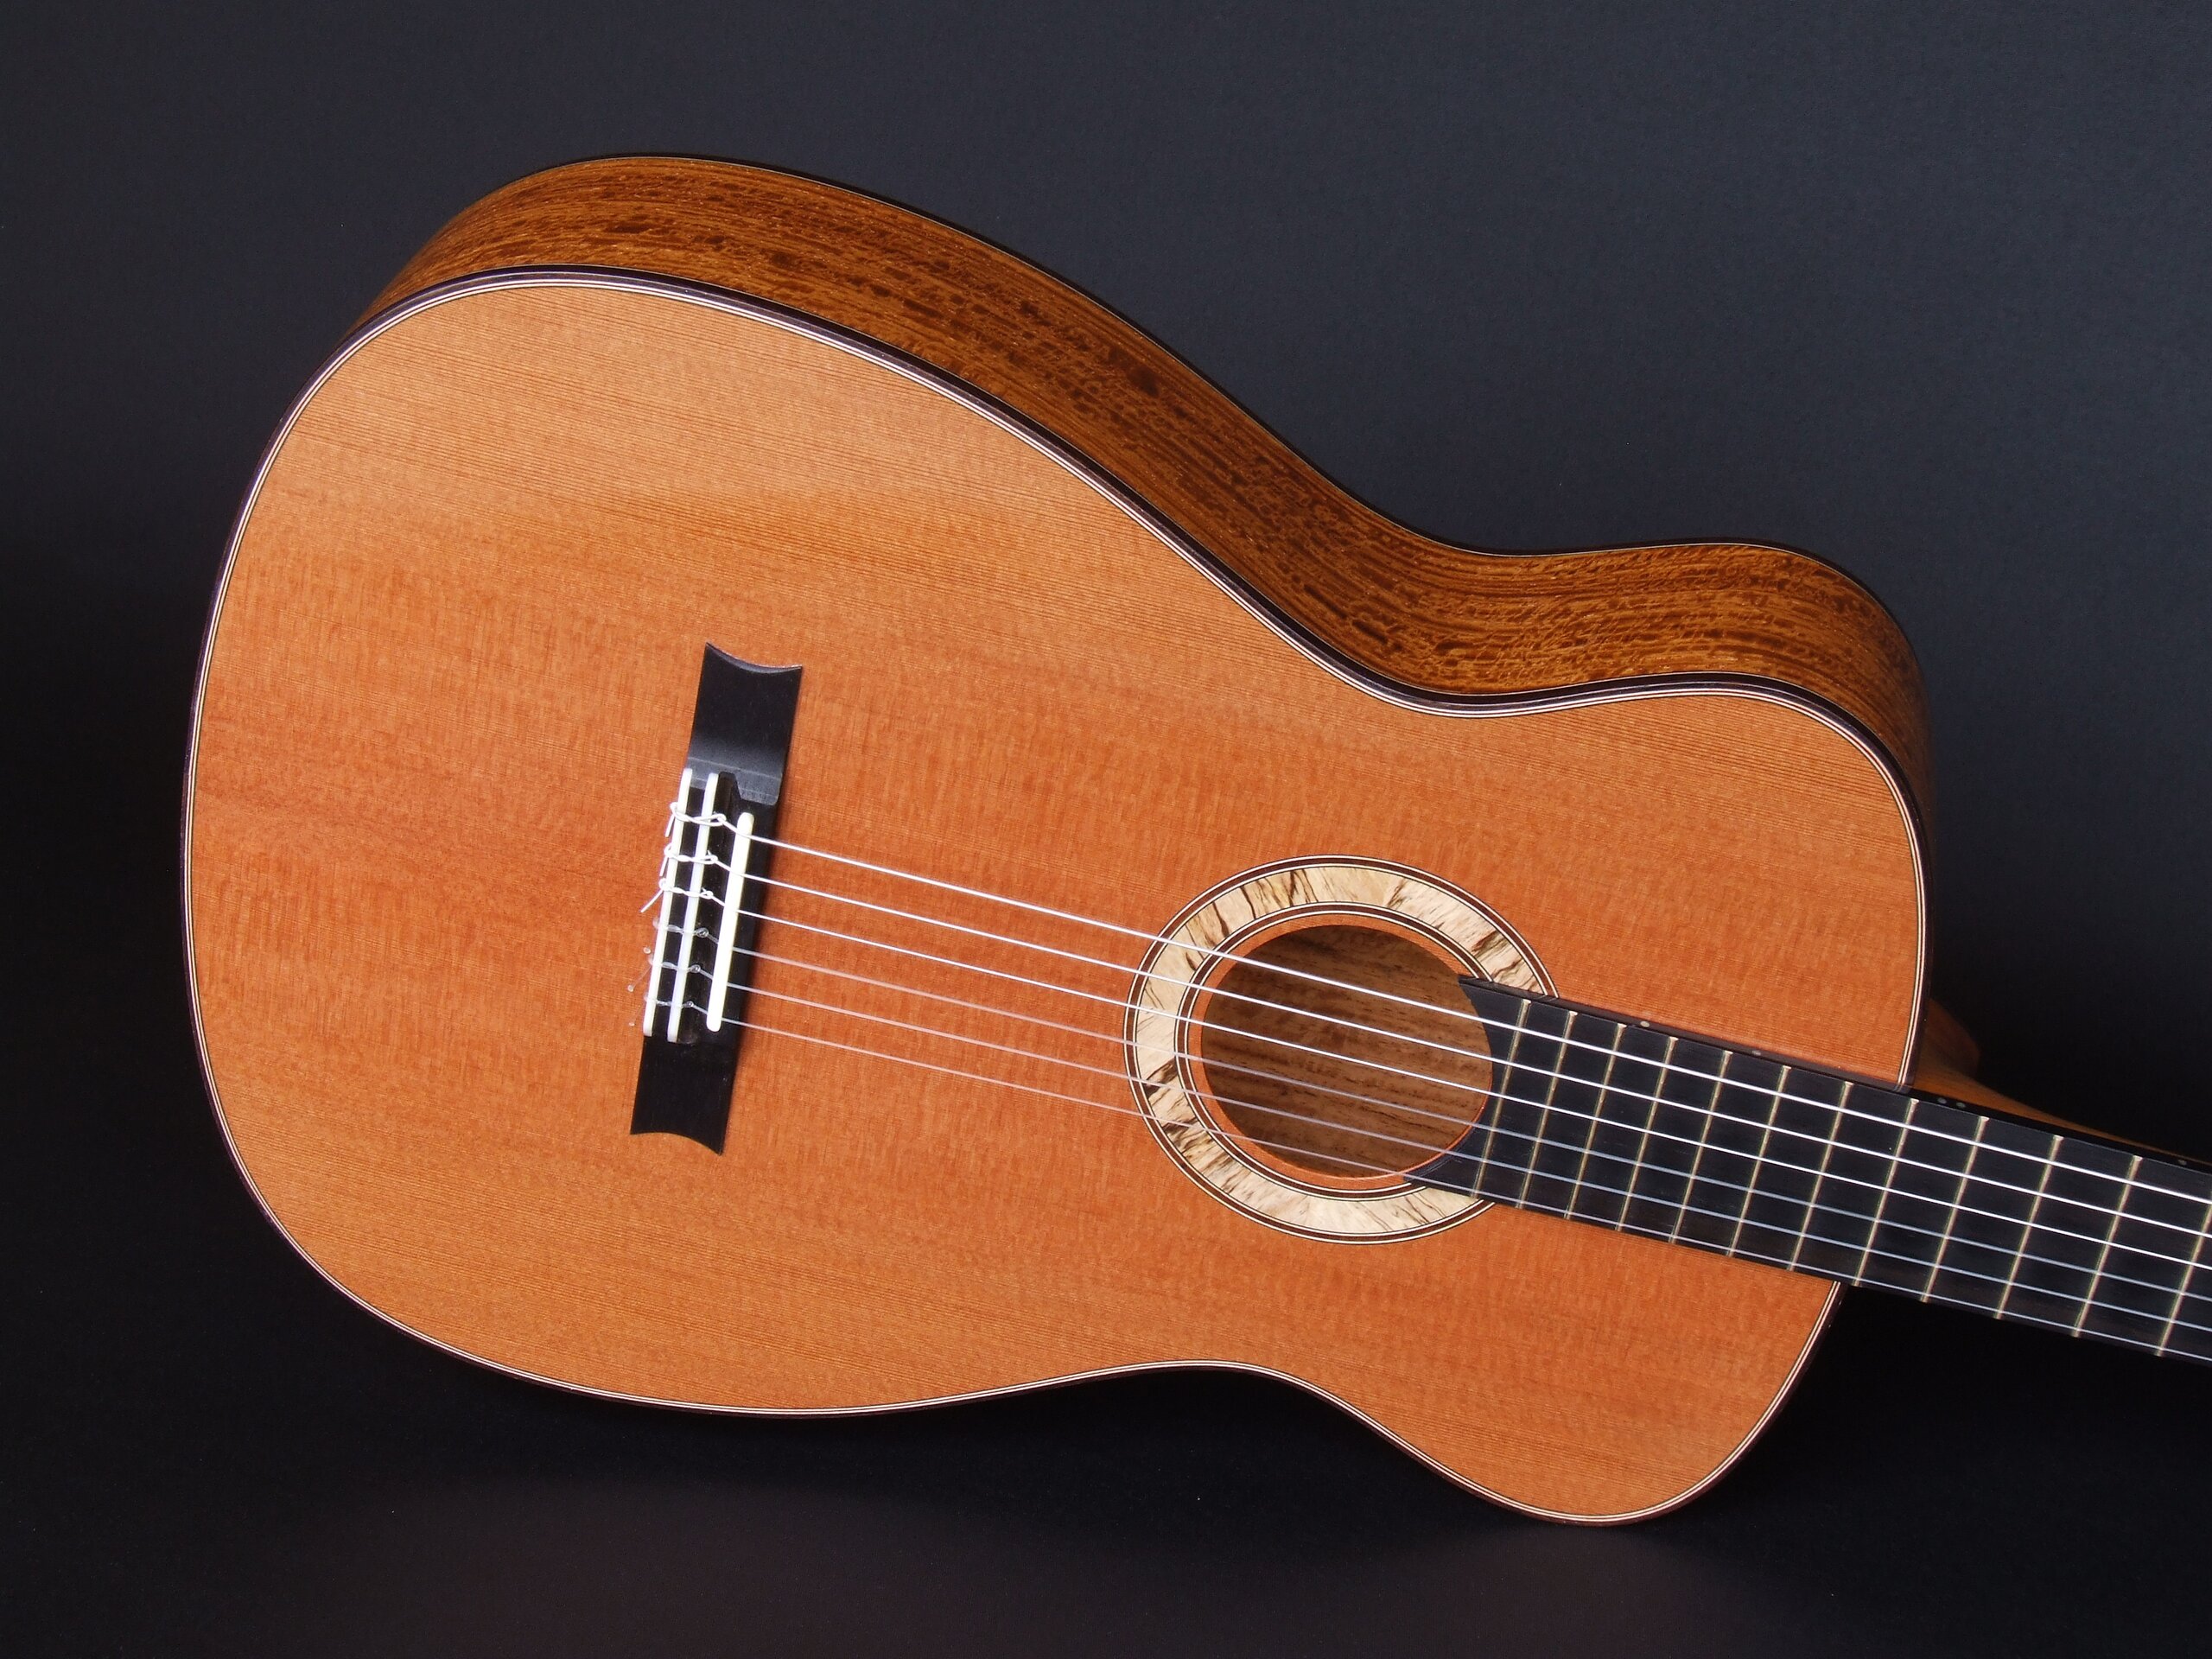 Neo-classical guitar with redwood top and spalted blackwood rosette